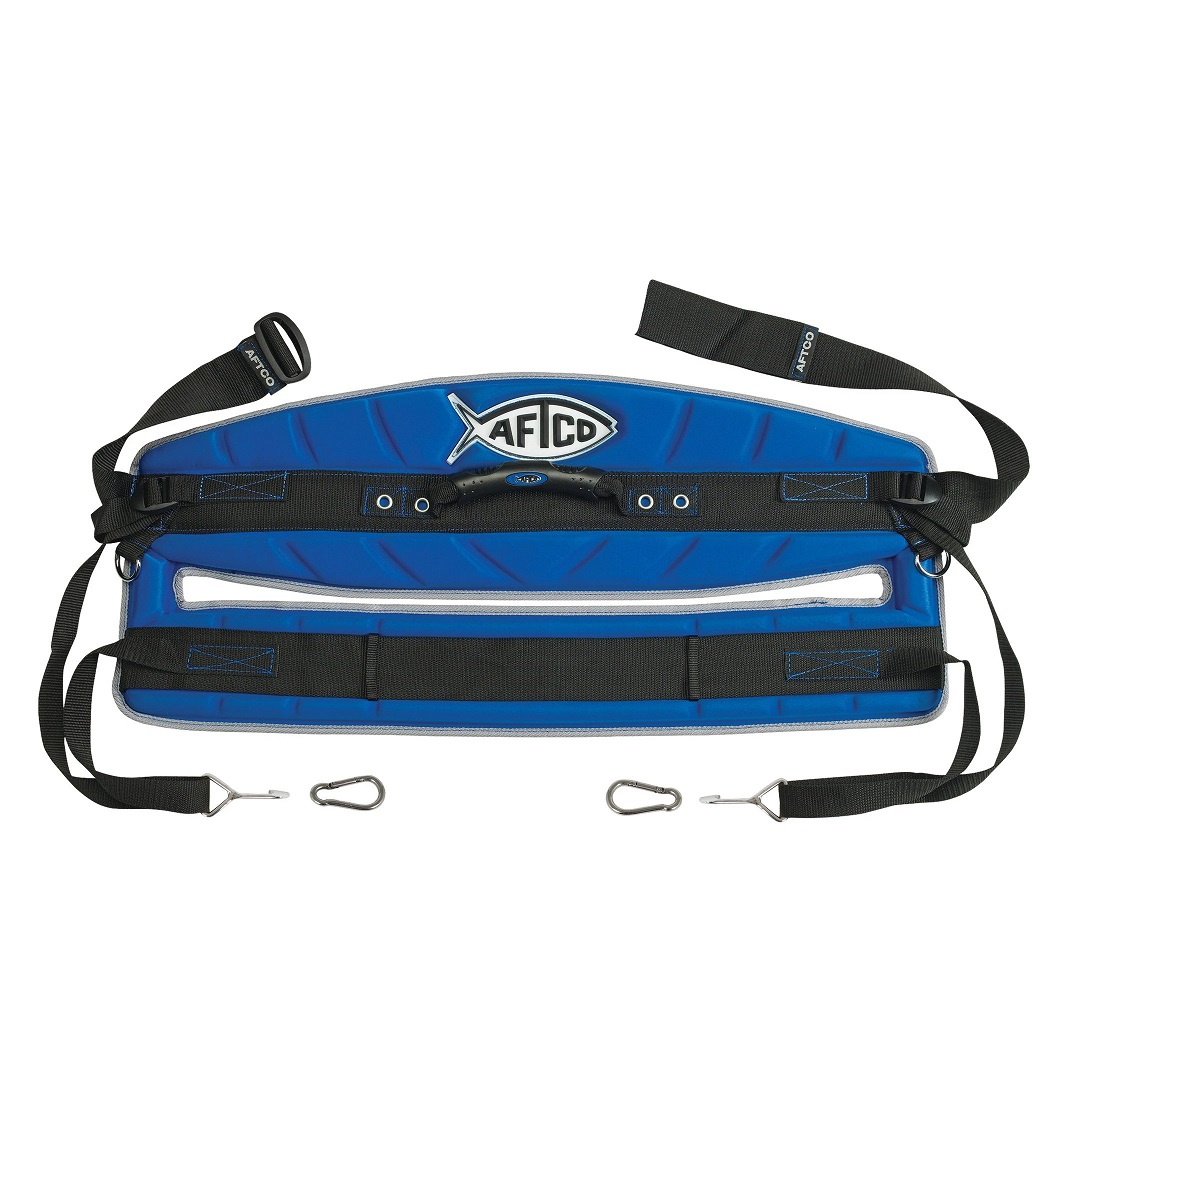 AFTCO MAXFORCE HARNESS - Fisherman's Outfitter